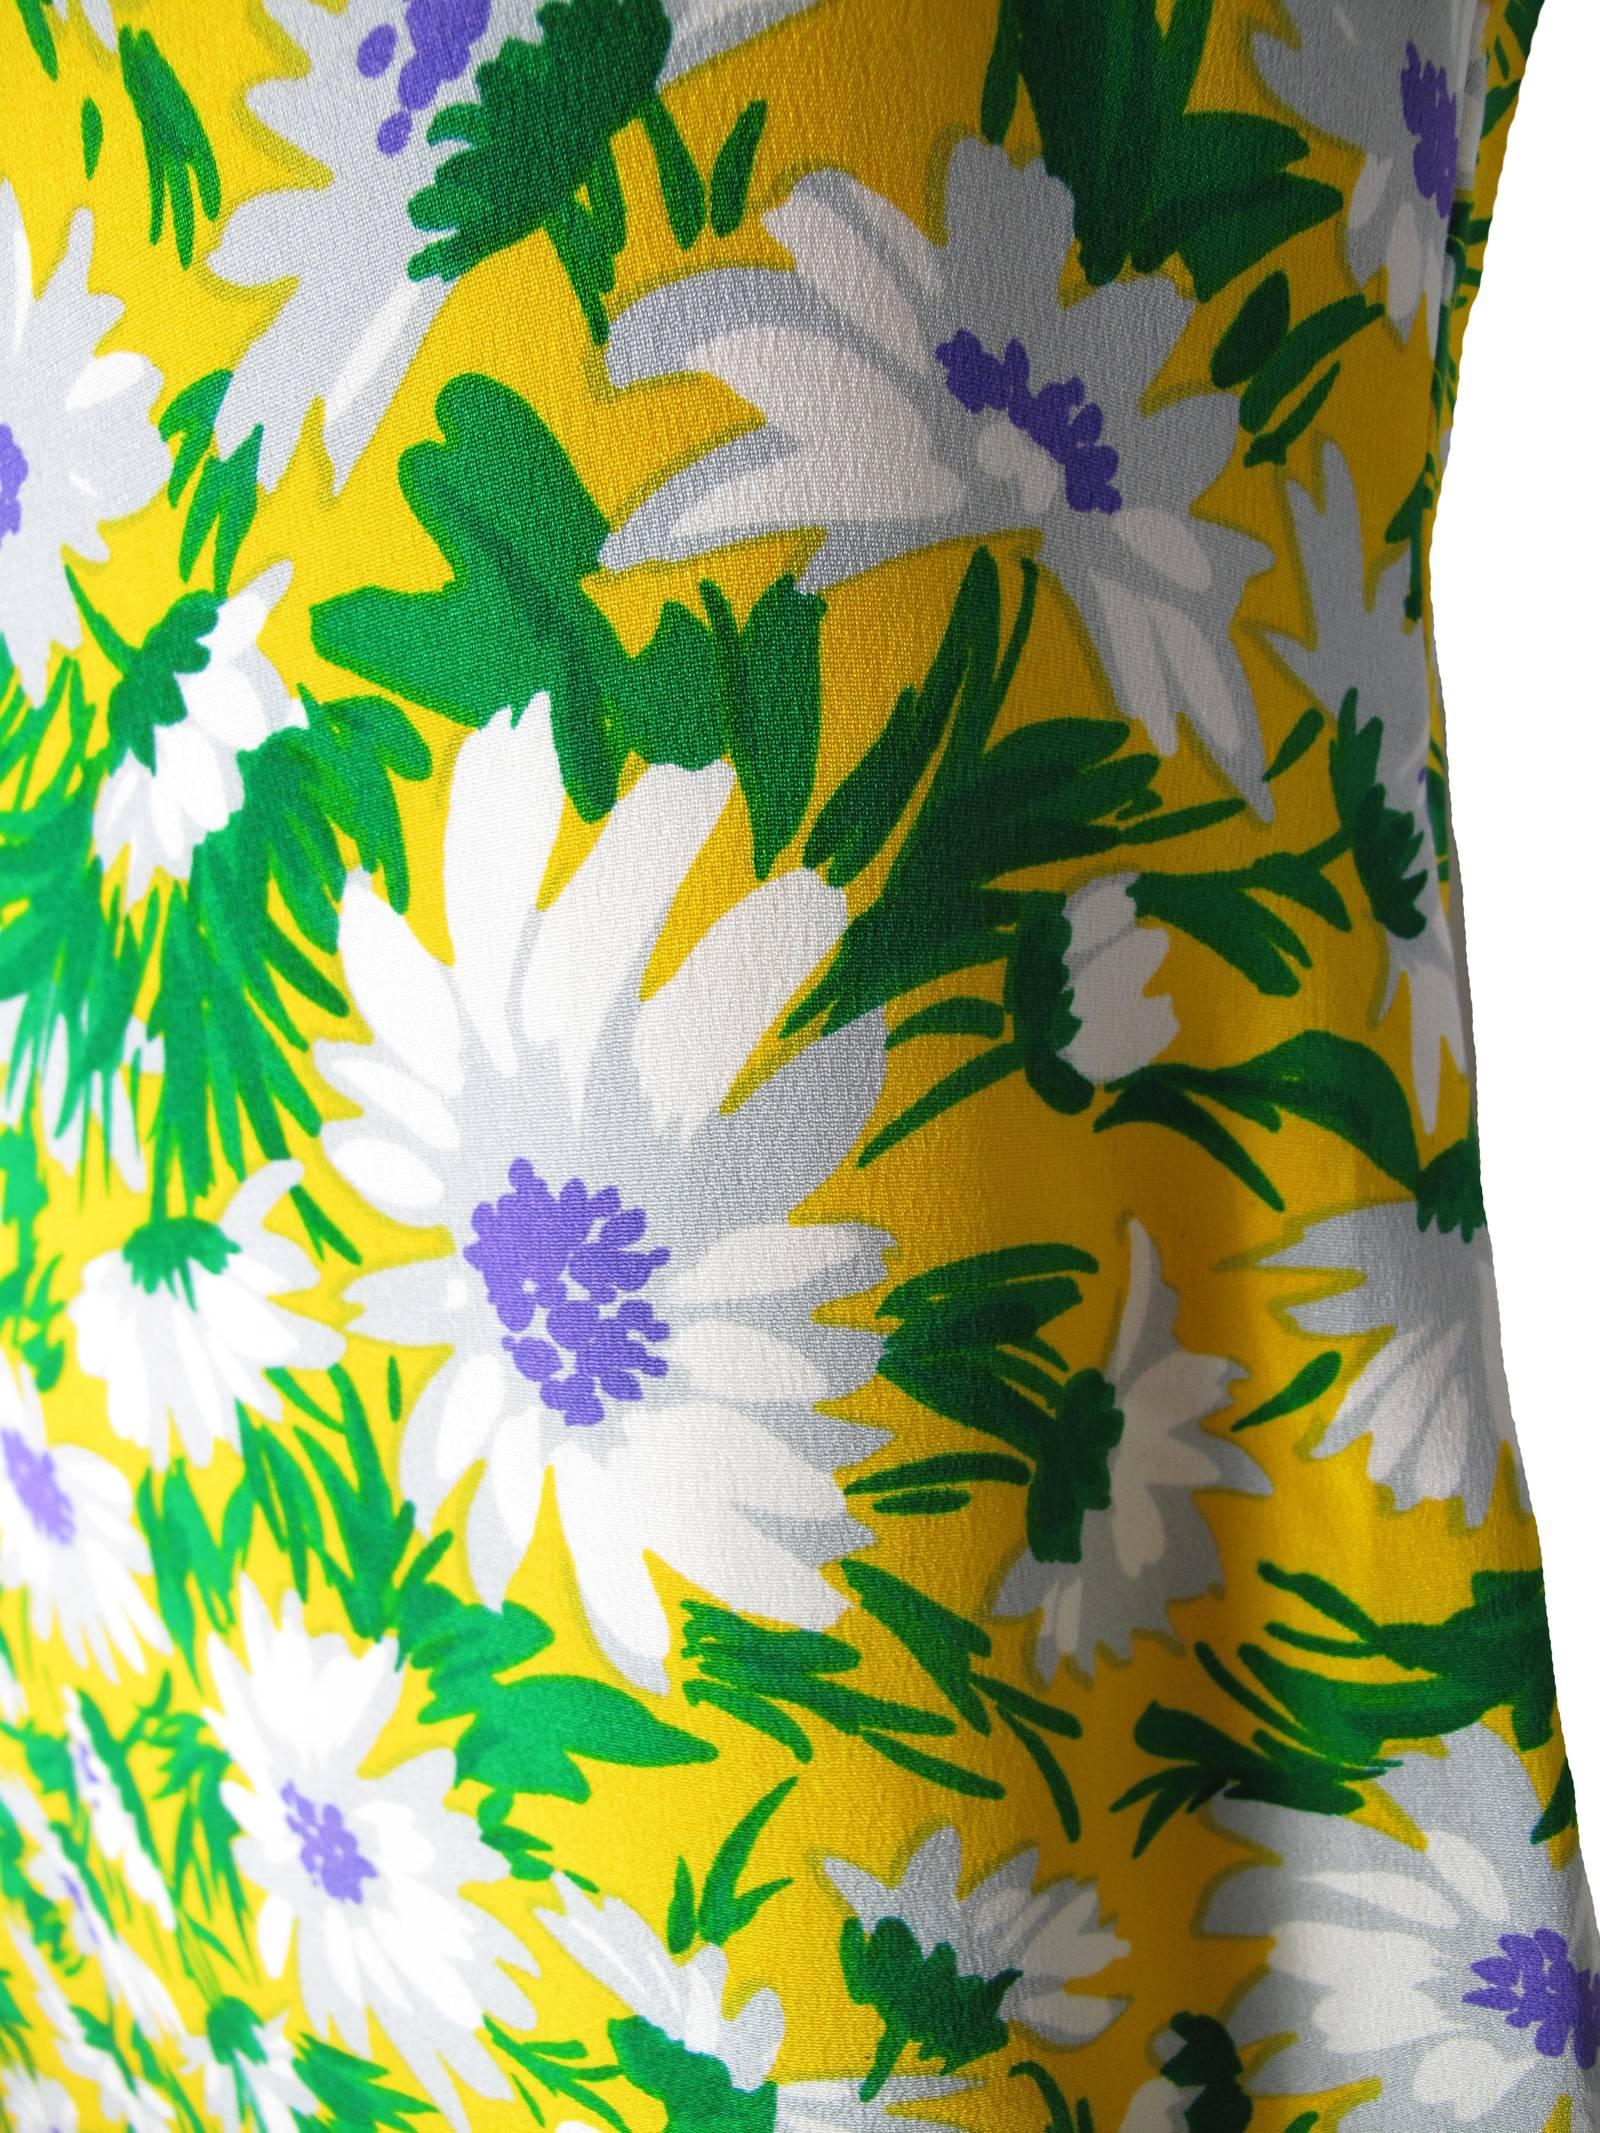 Galanos bright yellows with grey, purple and white flowers and green stems print.  Condition: Excellent. Size X large

We accept returns for refund, please see our terms.  We offer free ground shipping within the US.  Let us know if you have any